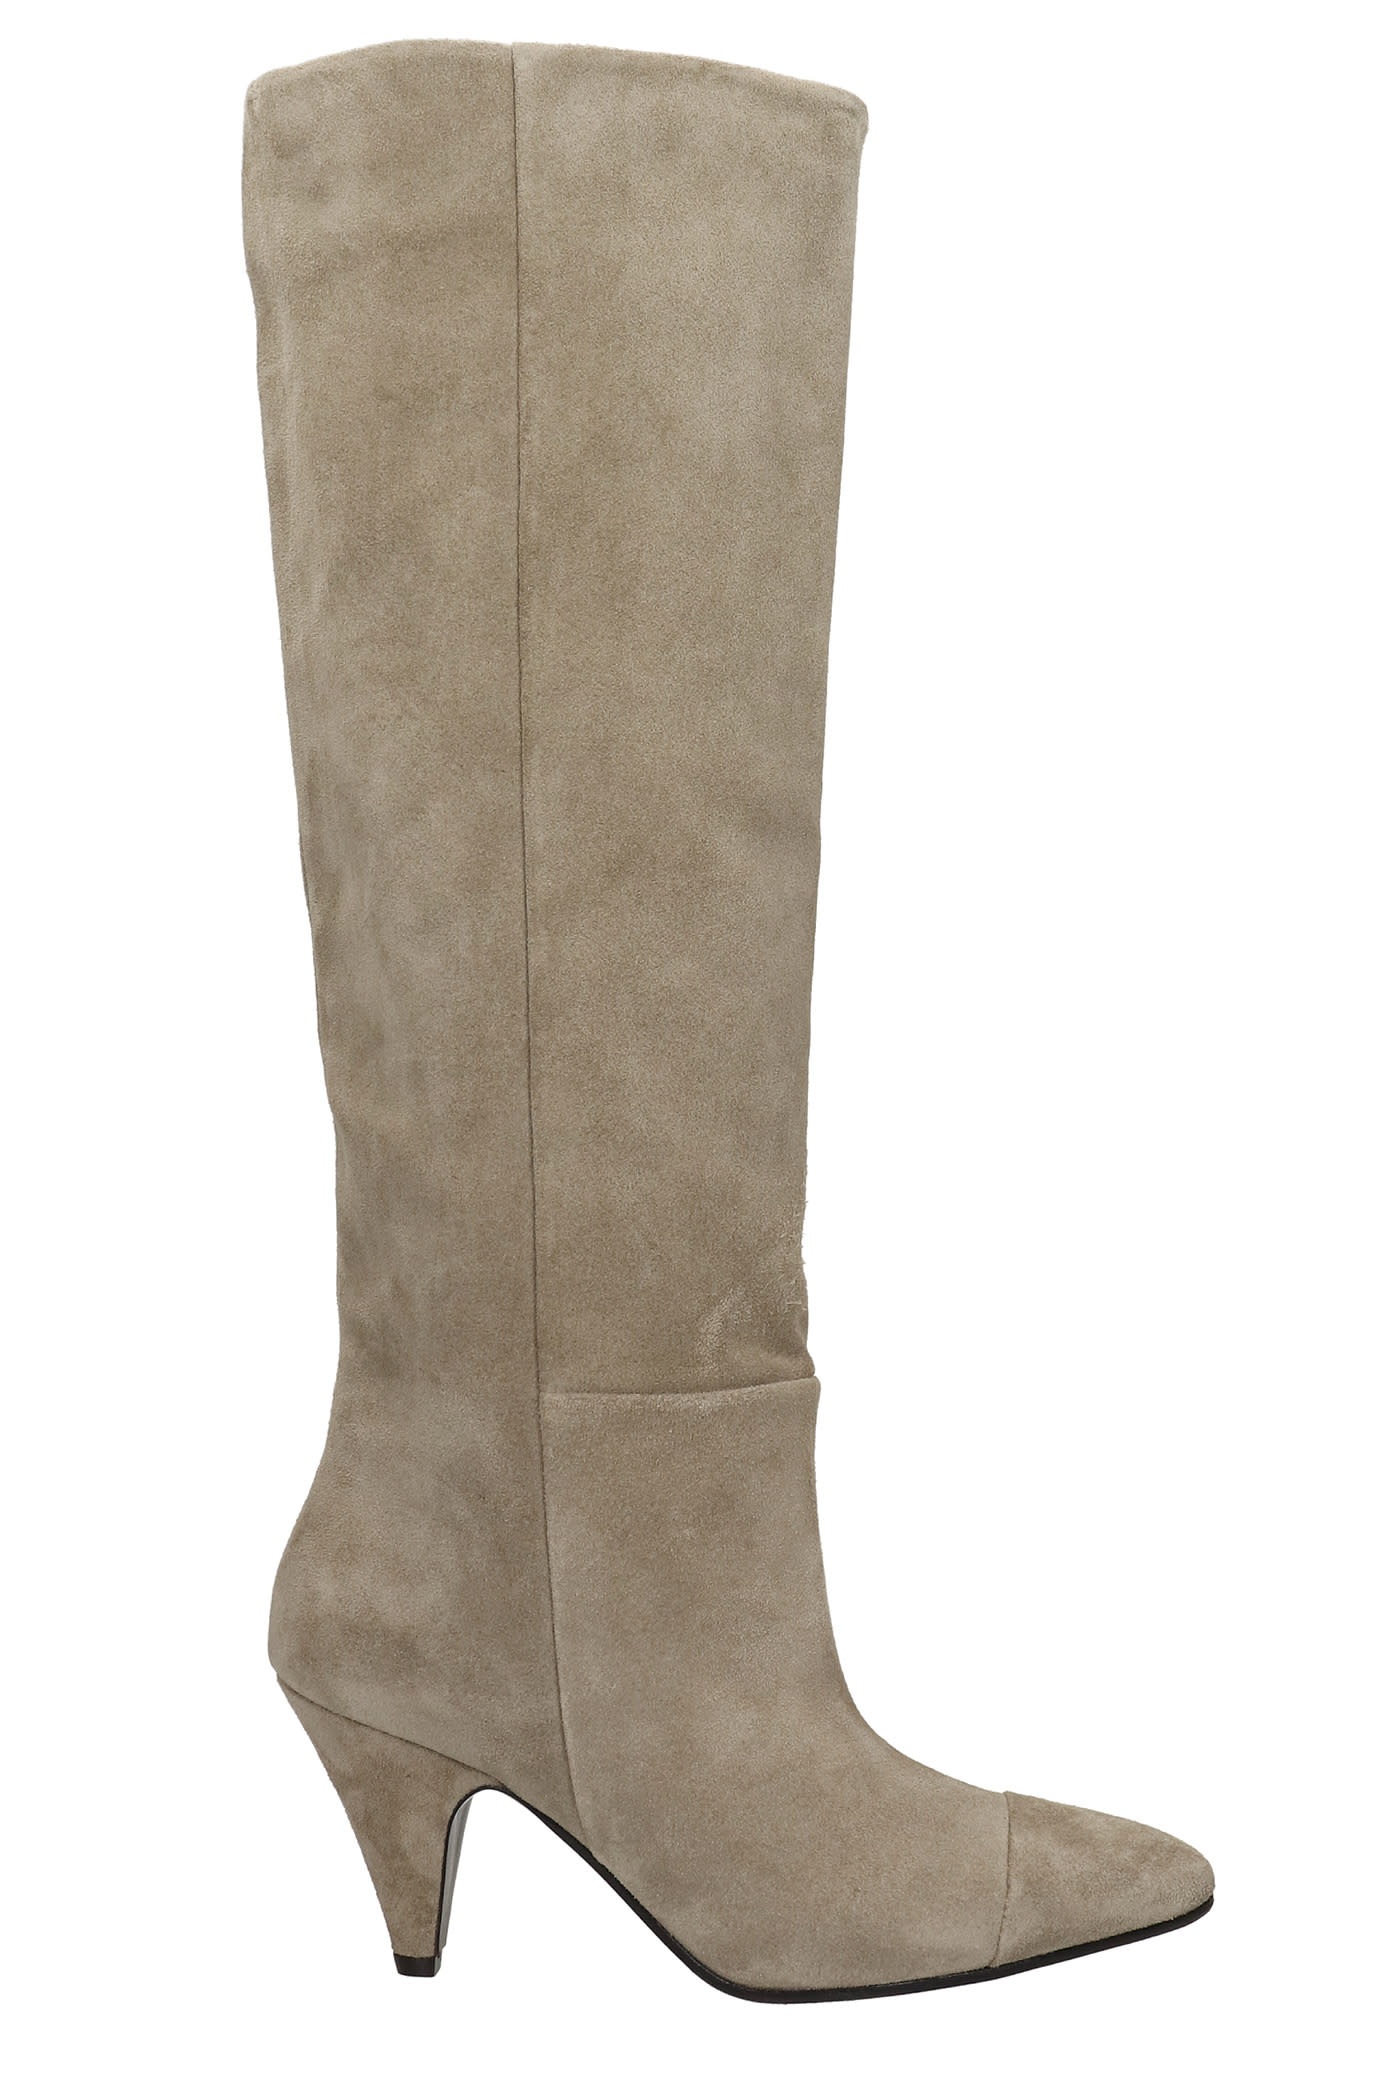 Fabio Rusconi High Heels Boots In Taupe Suede